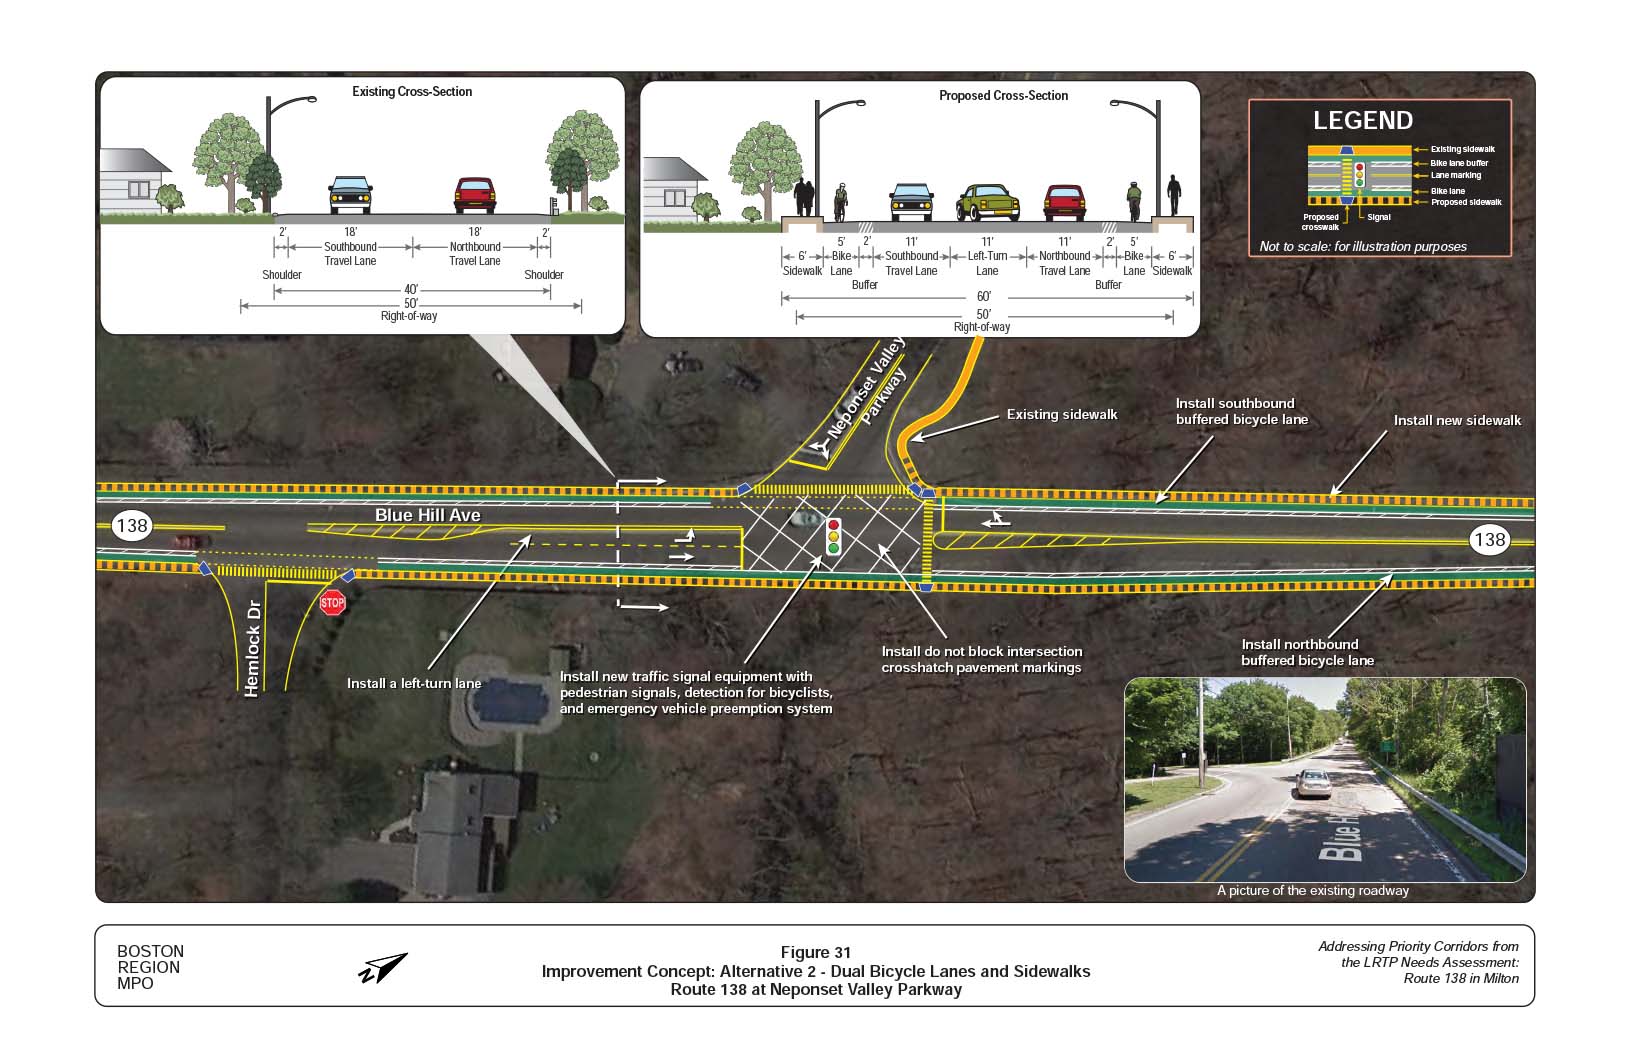 Figure 31 is an aerial photo of Route 138 at Neponset Valley Parkway showing Alternative 2, dual bicycle lanes and sidewalks, and overlays showing the existing and proposed cross-sections.